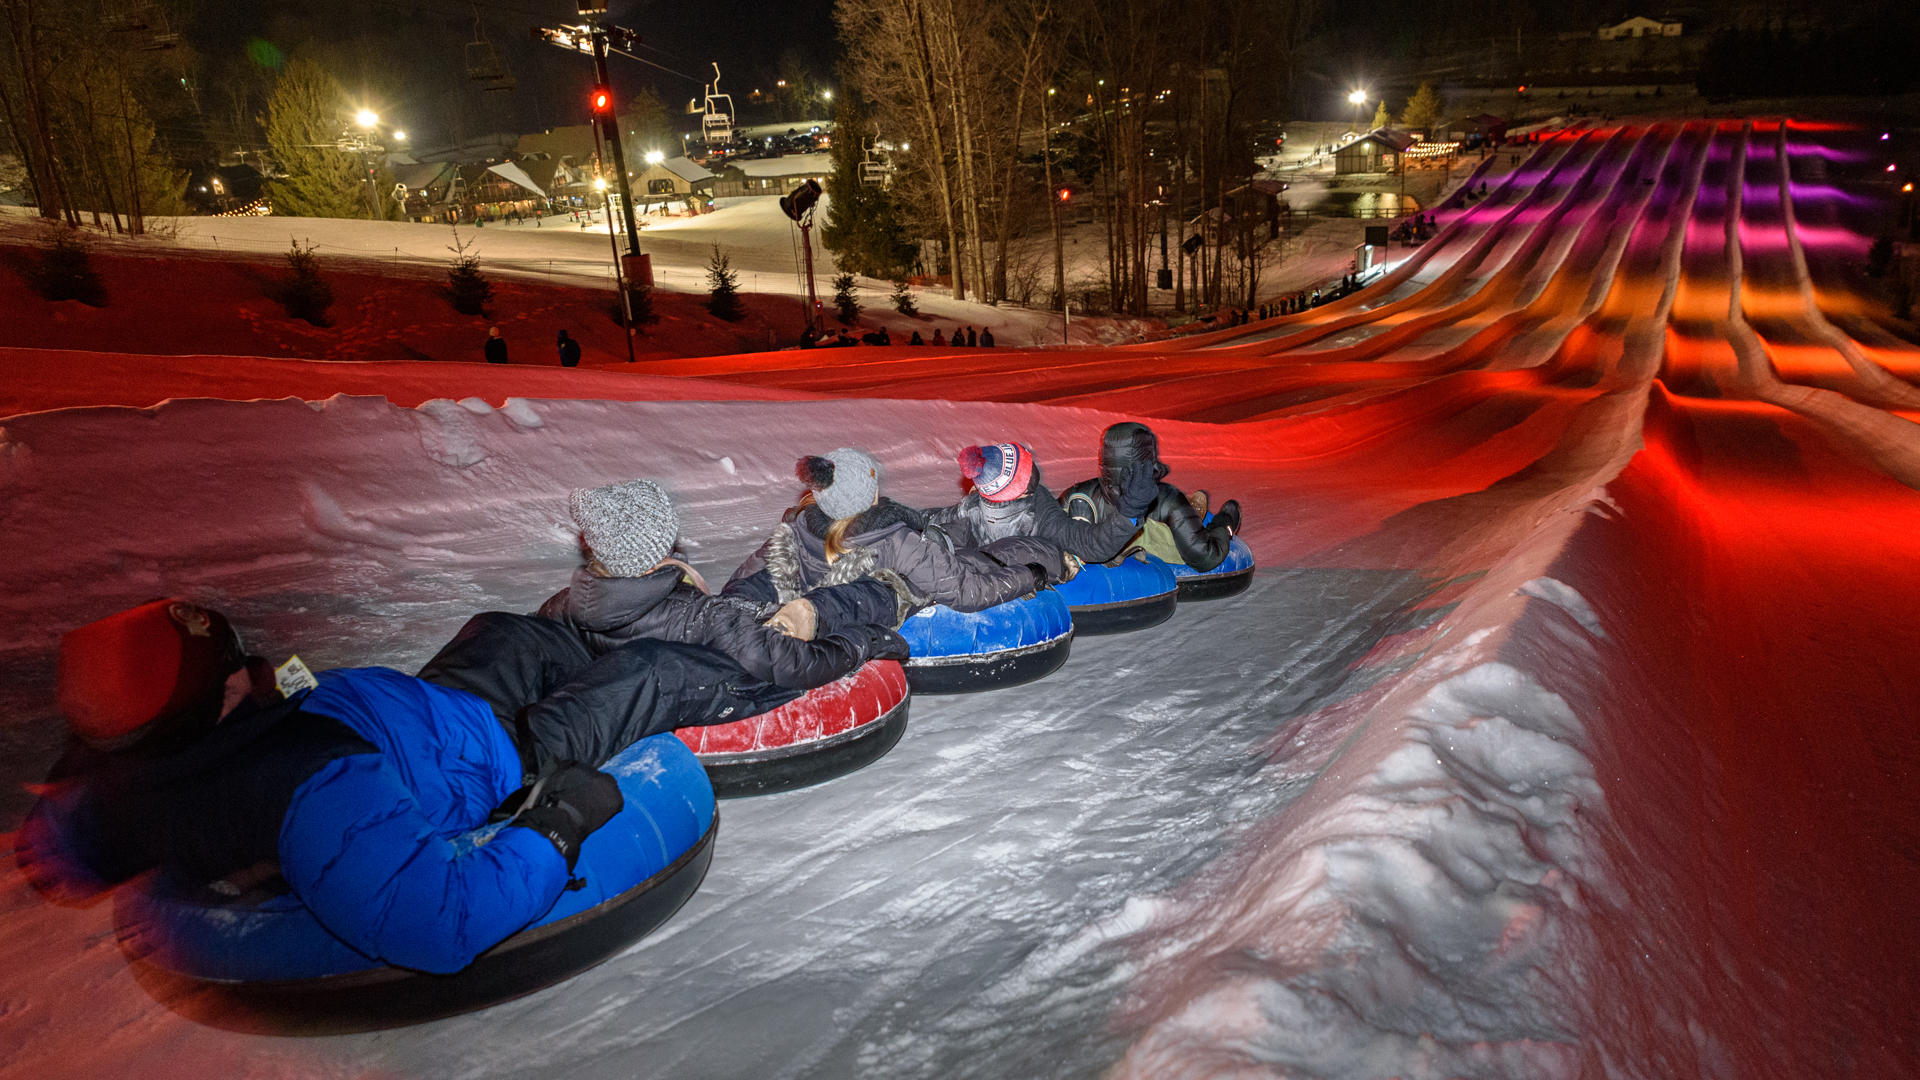 Glow Tubing at Snow Trails Vertical Descent Tubing Park is family fun for all ages